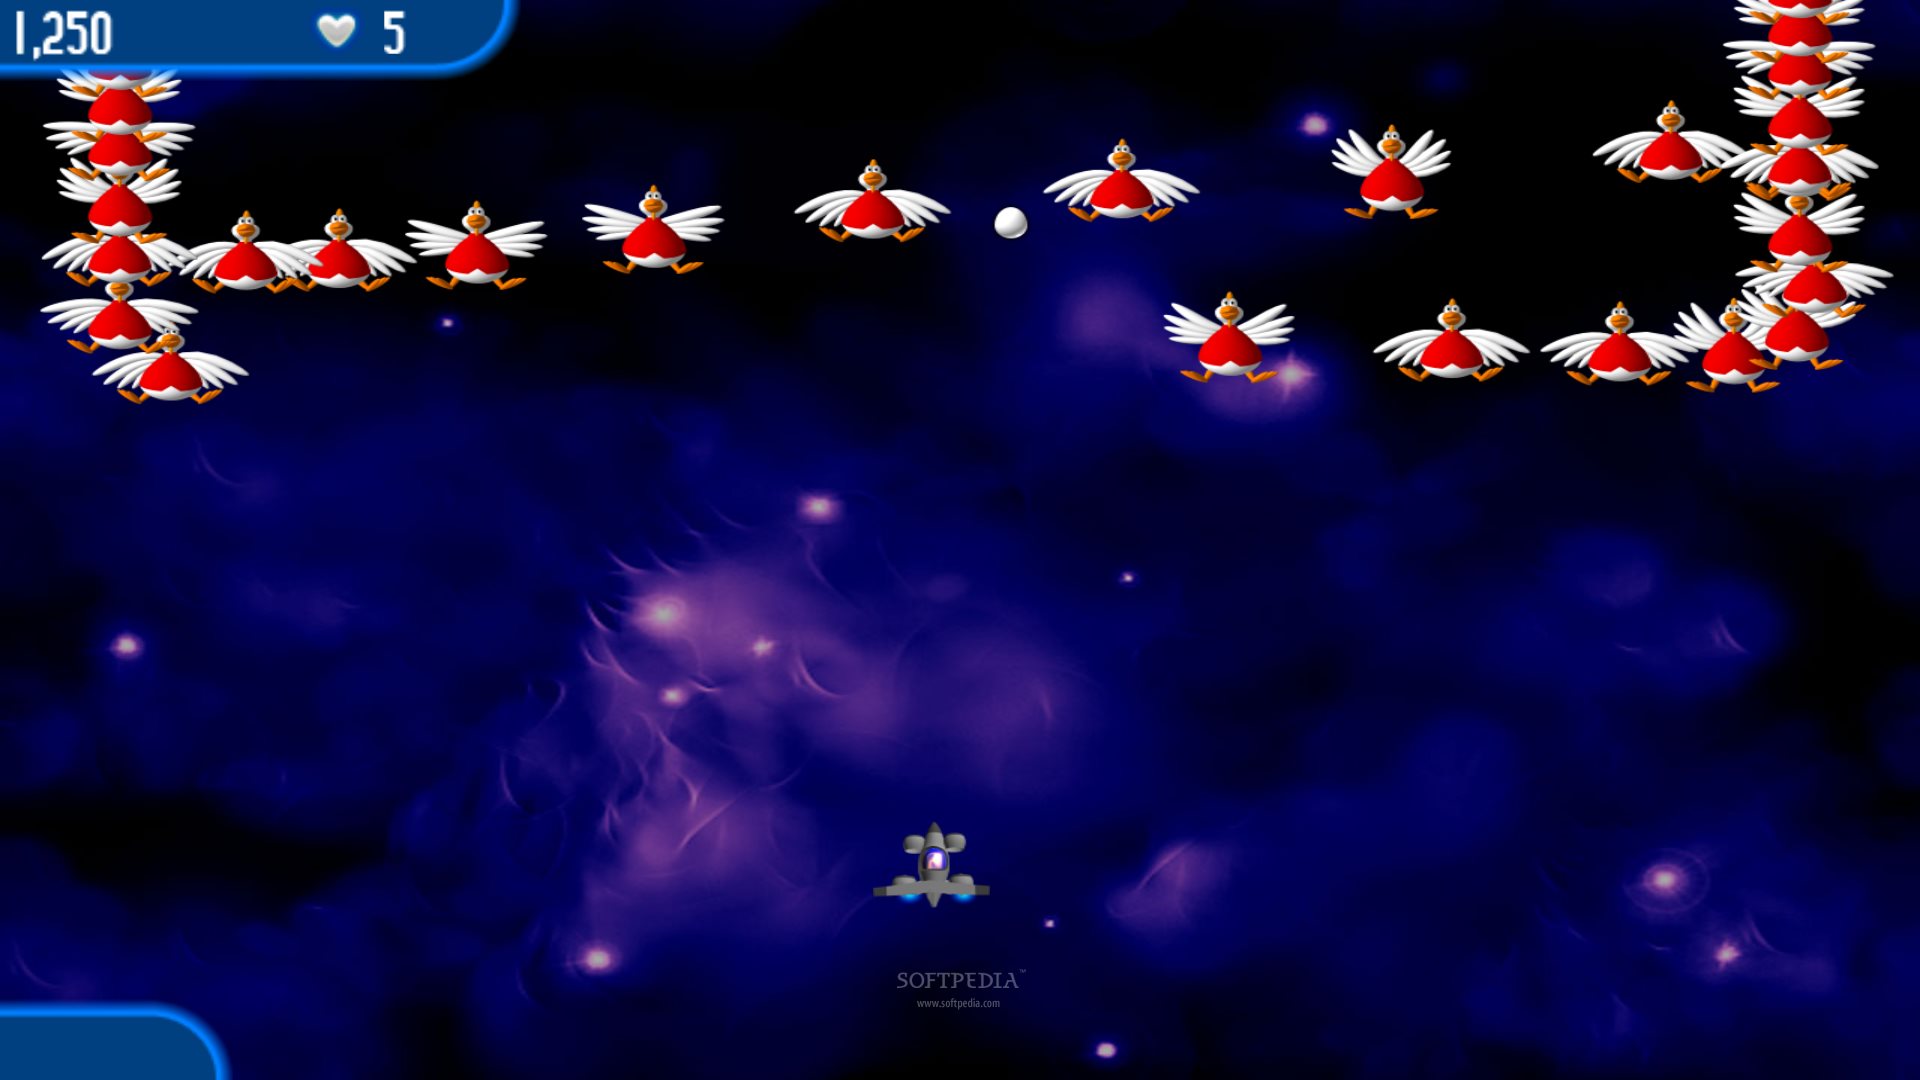 chicken invaders 2 free download full version for pc cnet